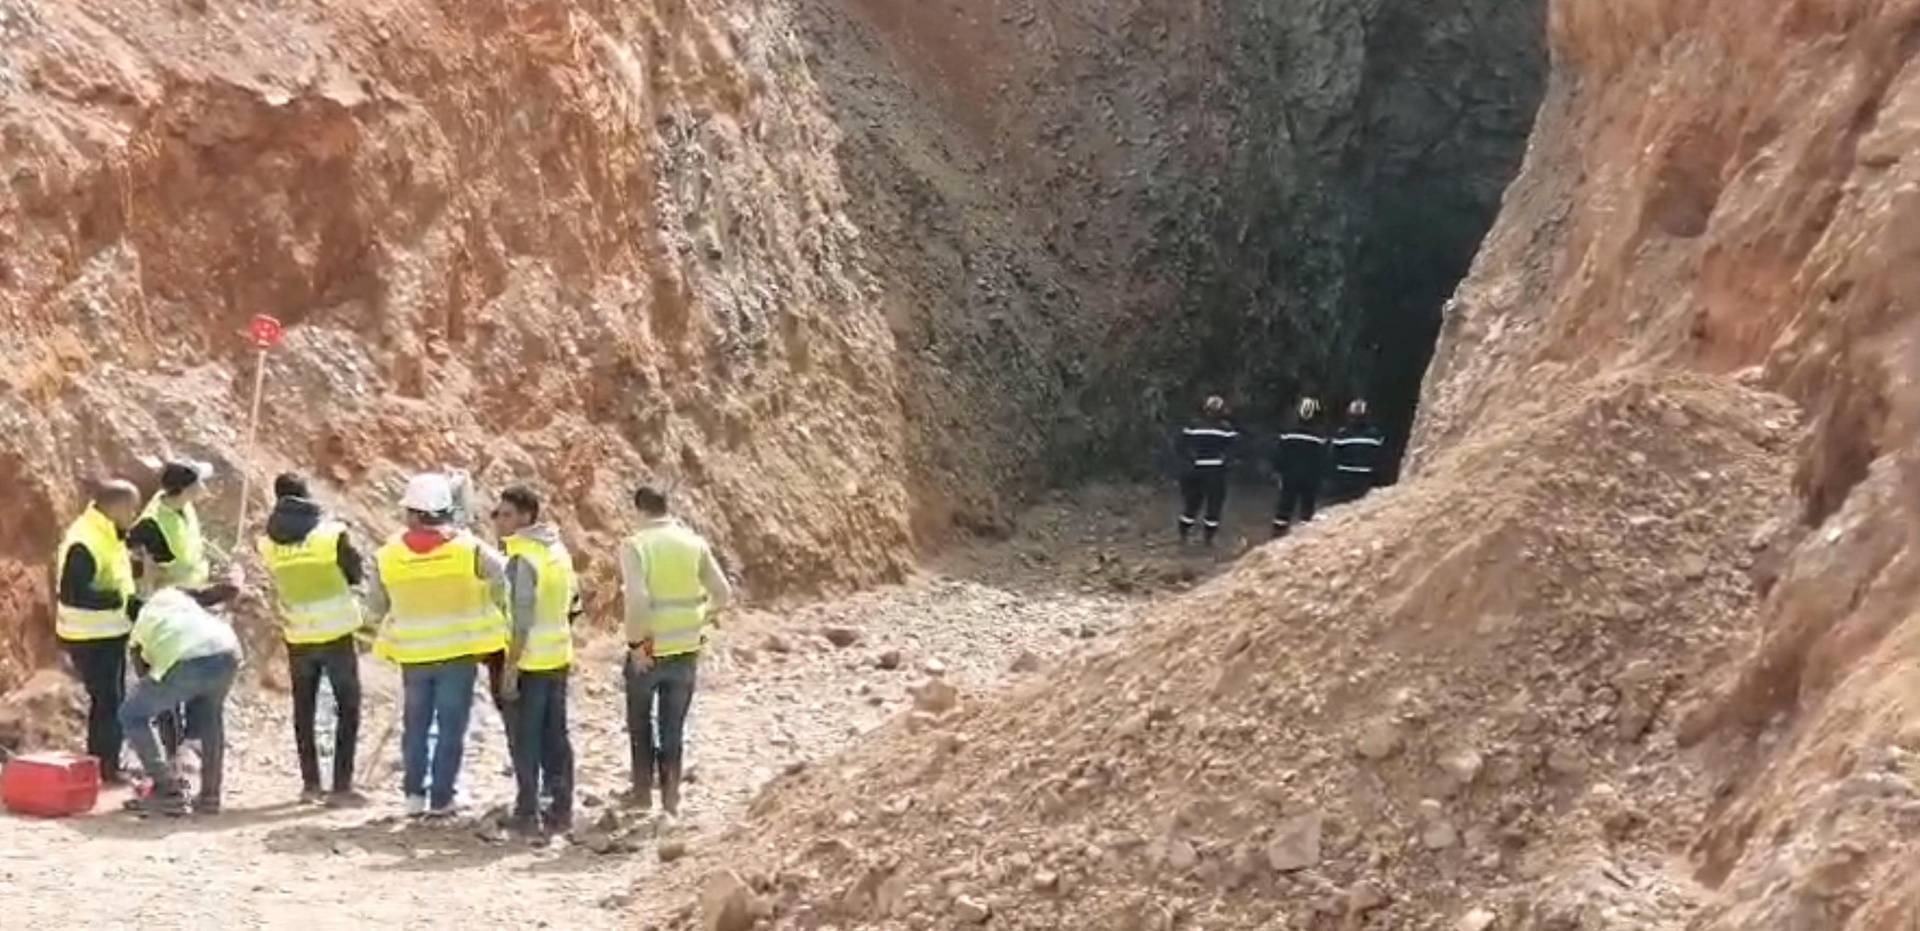 Rescuers dig to reach boy stuck in well in Chefchaouen